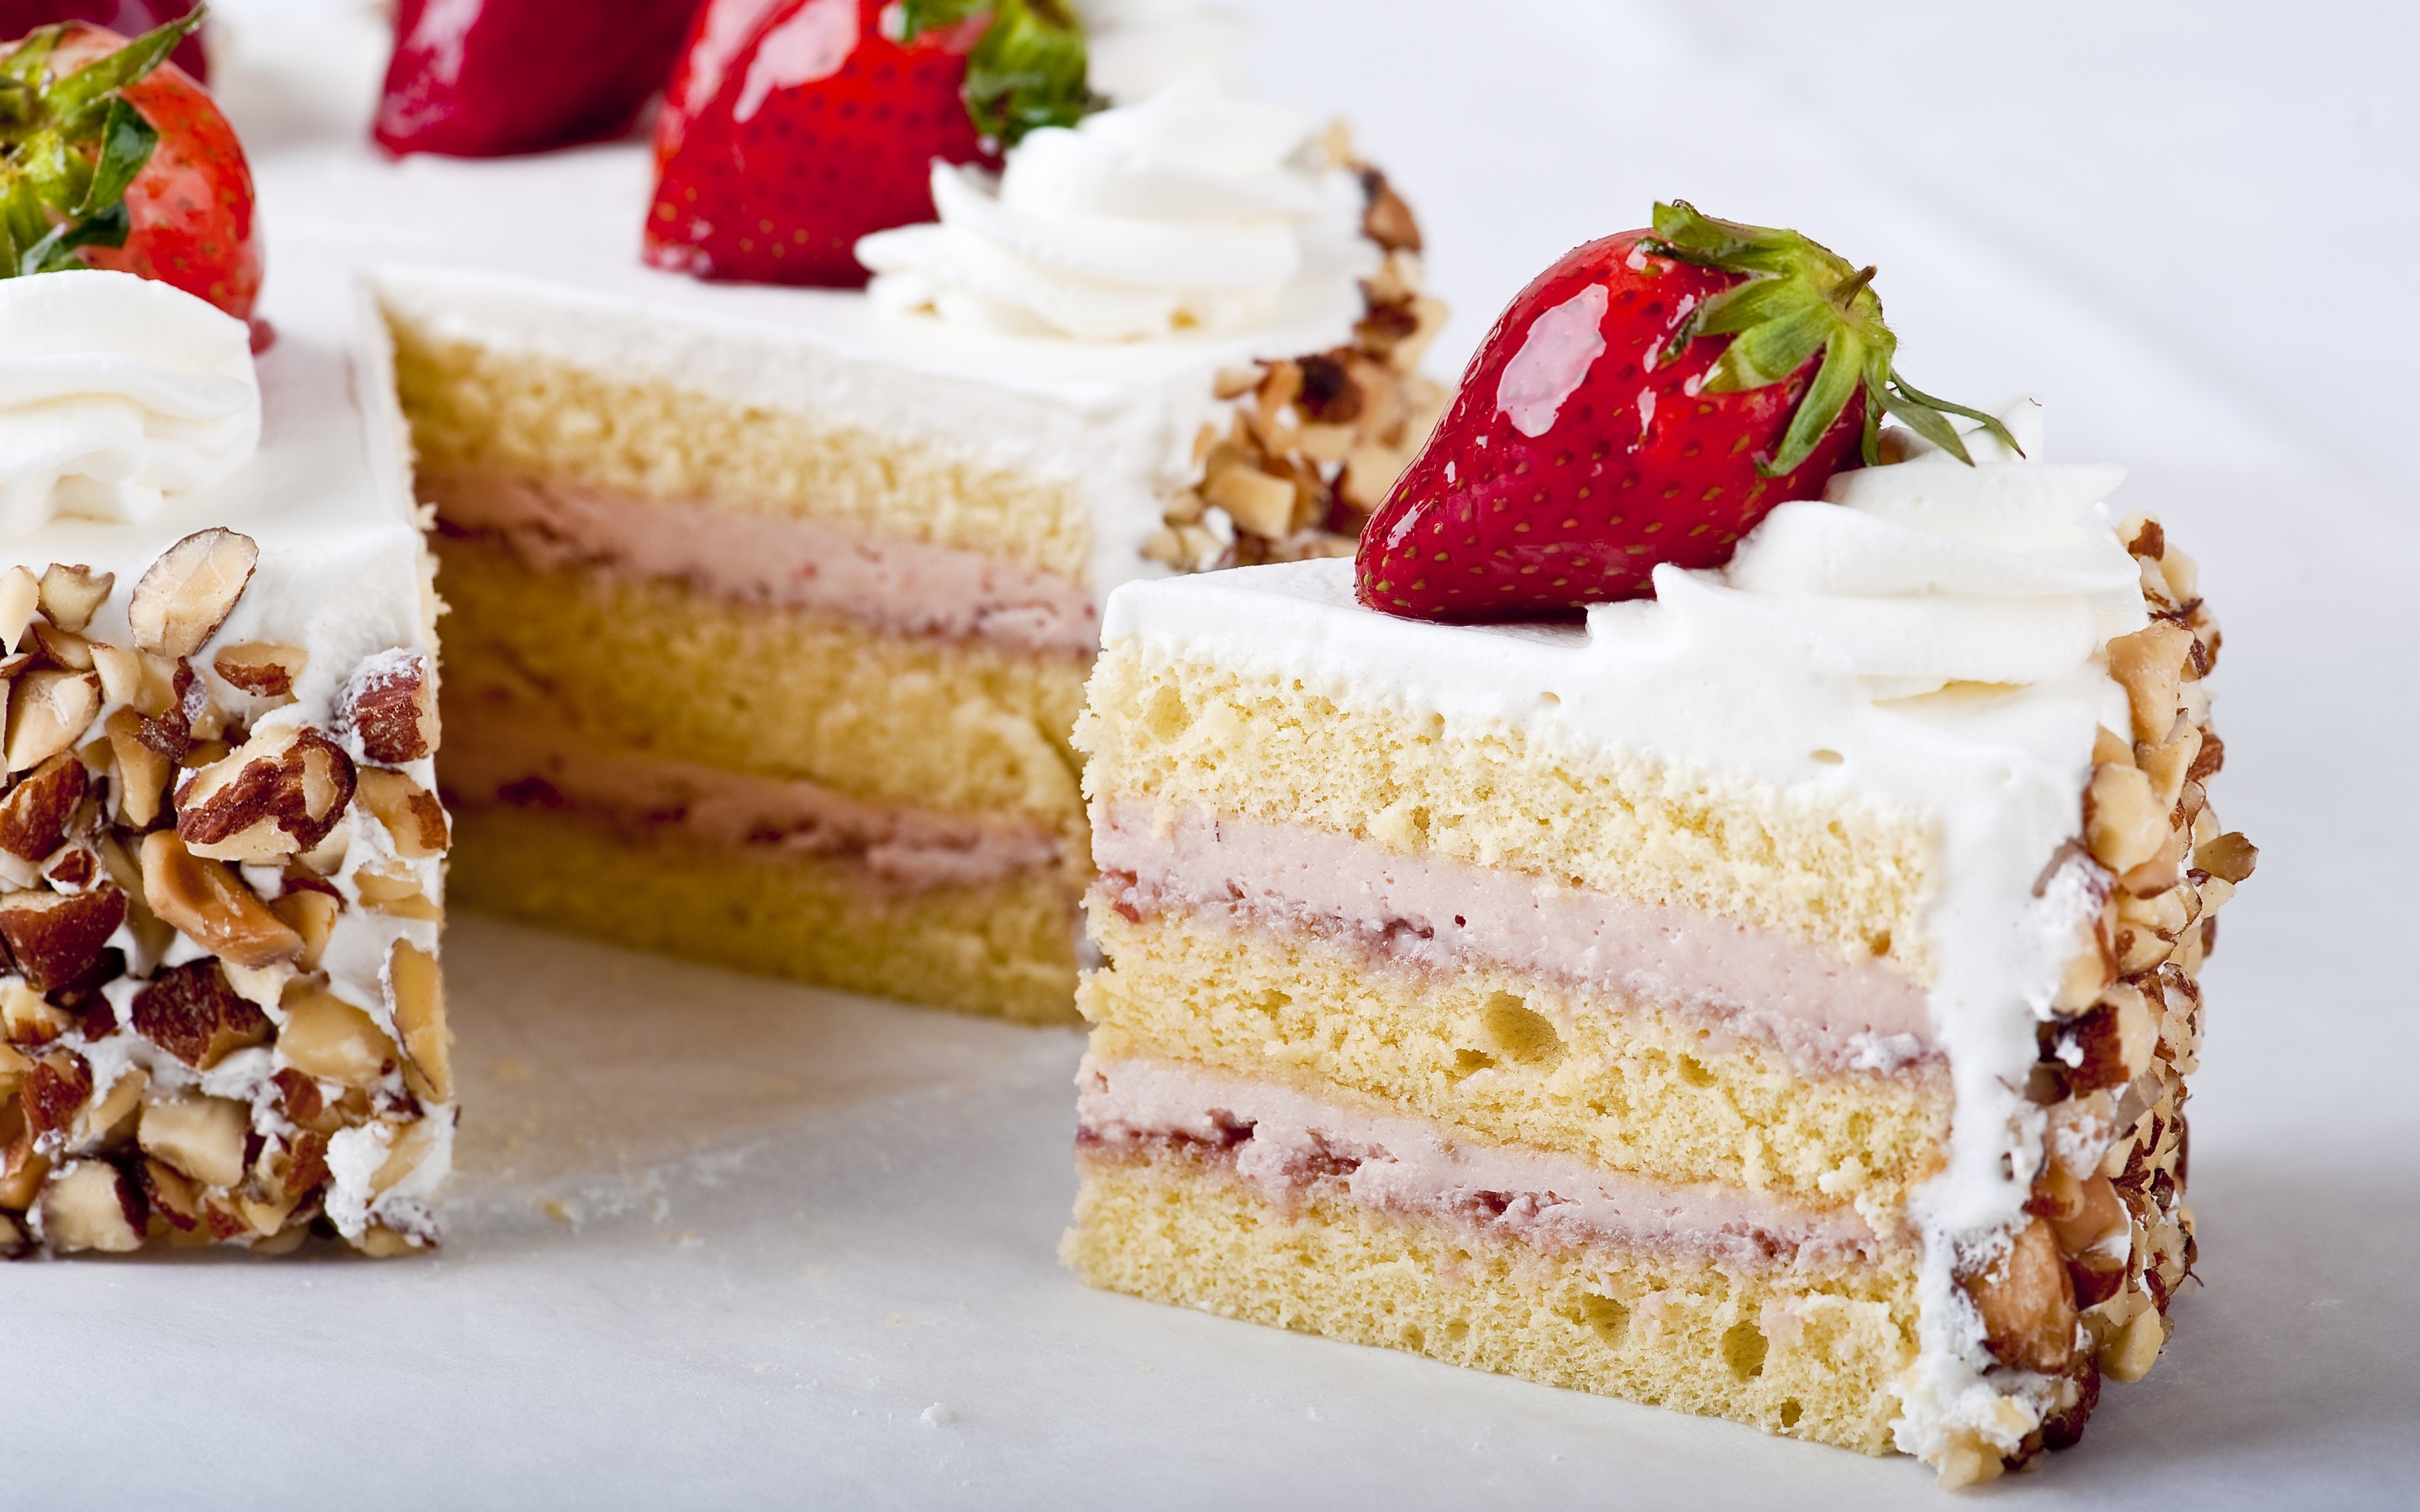 Cake: Made with cream cheese, eggs, and a cookie or graham cracker crust. 2880x1800 HD Wallpaper.